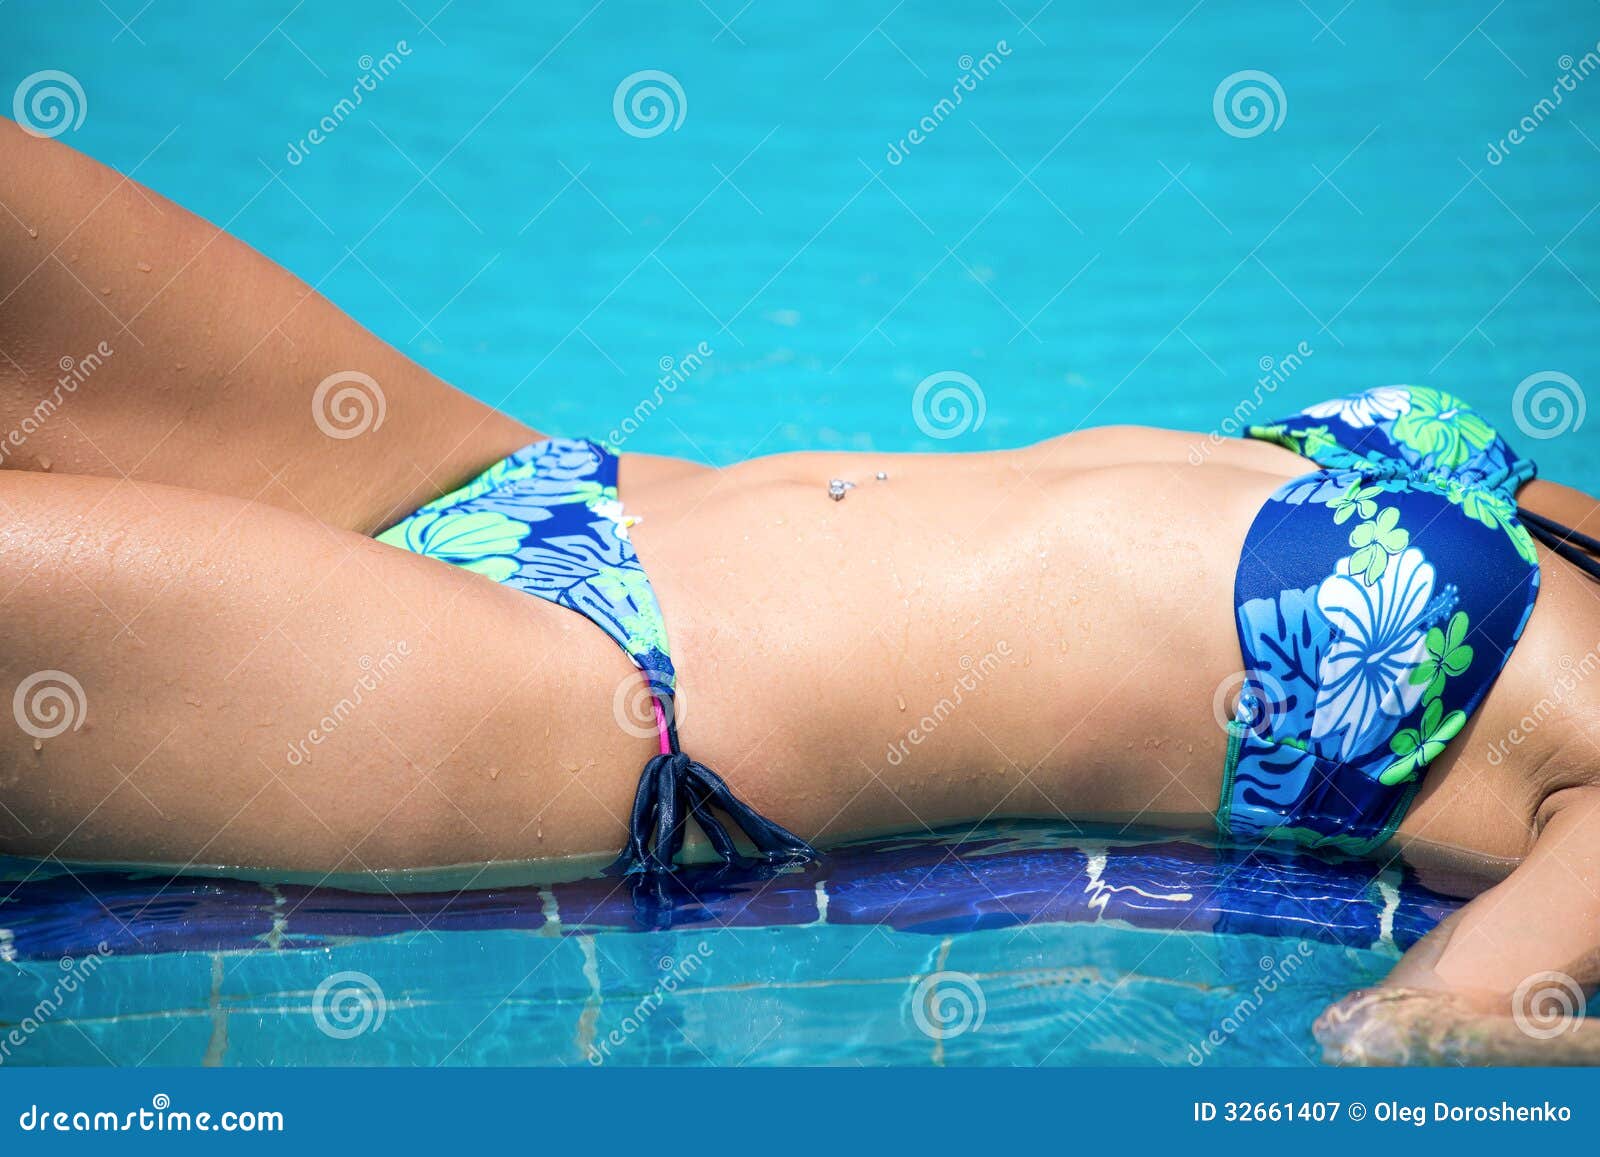 Woman Belly on the Swimming Pool Stock Image - Image of closeup, pool:  32661407